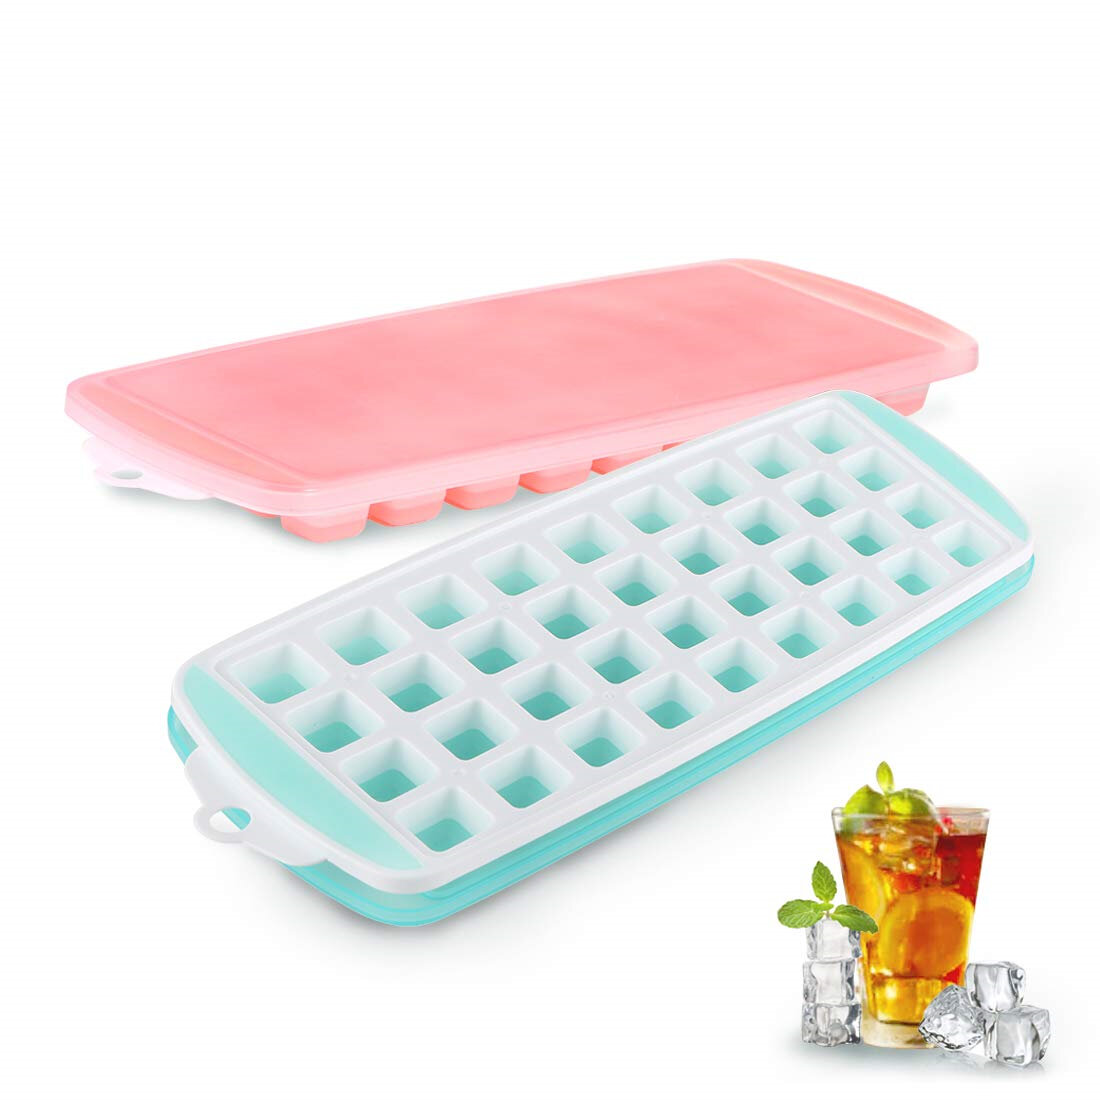 Easy Release Ice Cube Mold Containers Silicone Ice Cube Maker for Cocktail Whiskey 21 Shaped Cubes Each with Cover Korlon 3 Pack Silicone Ice Cube Trays with Lid